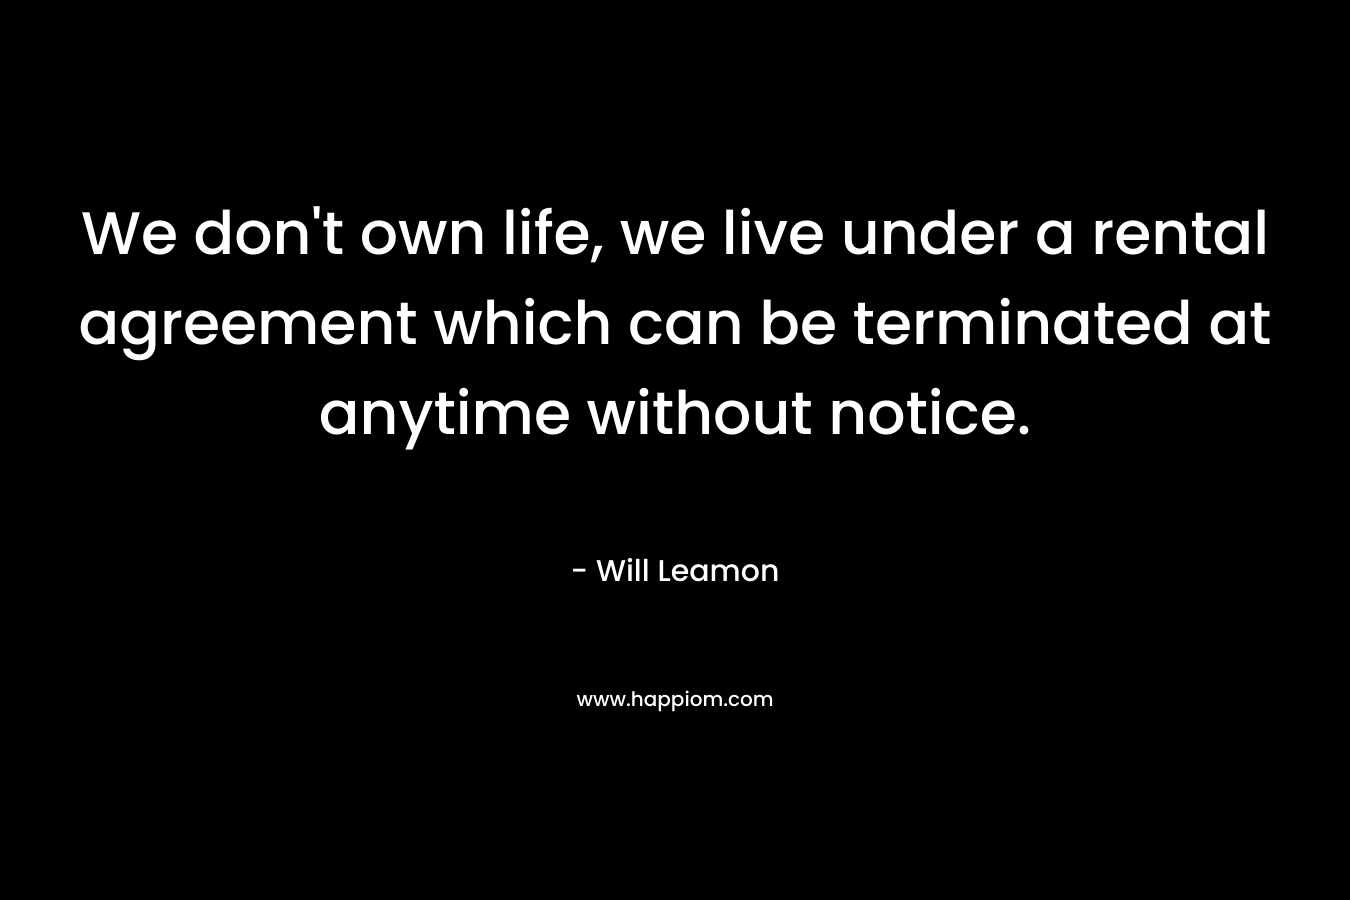 We don’t own life, we live under a rental agreement which can be terminated at anytime without notice. – Will Leamon